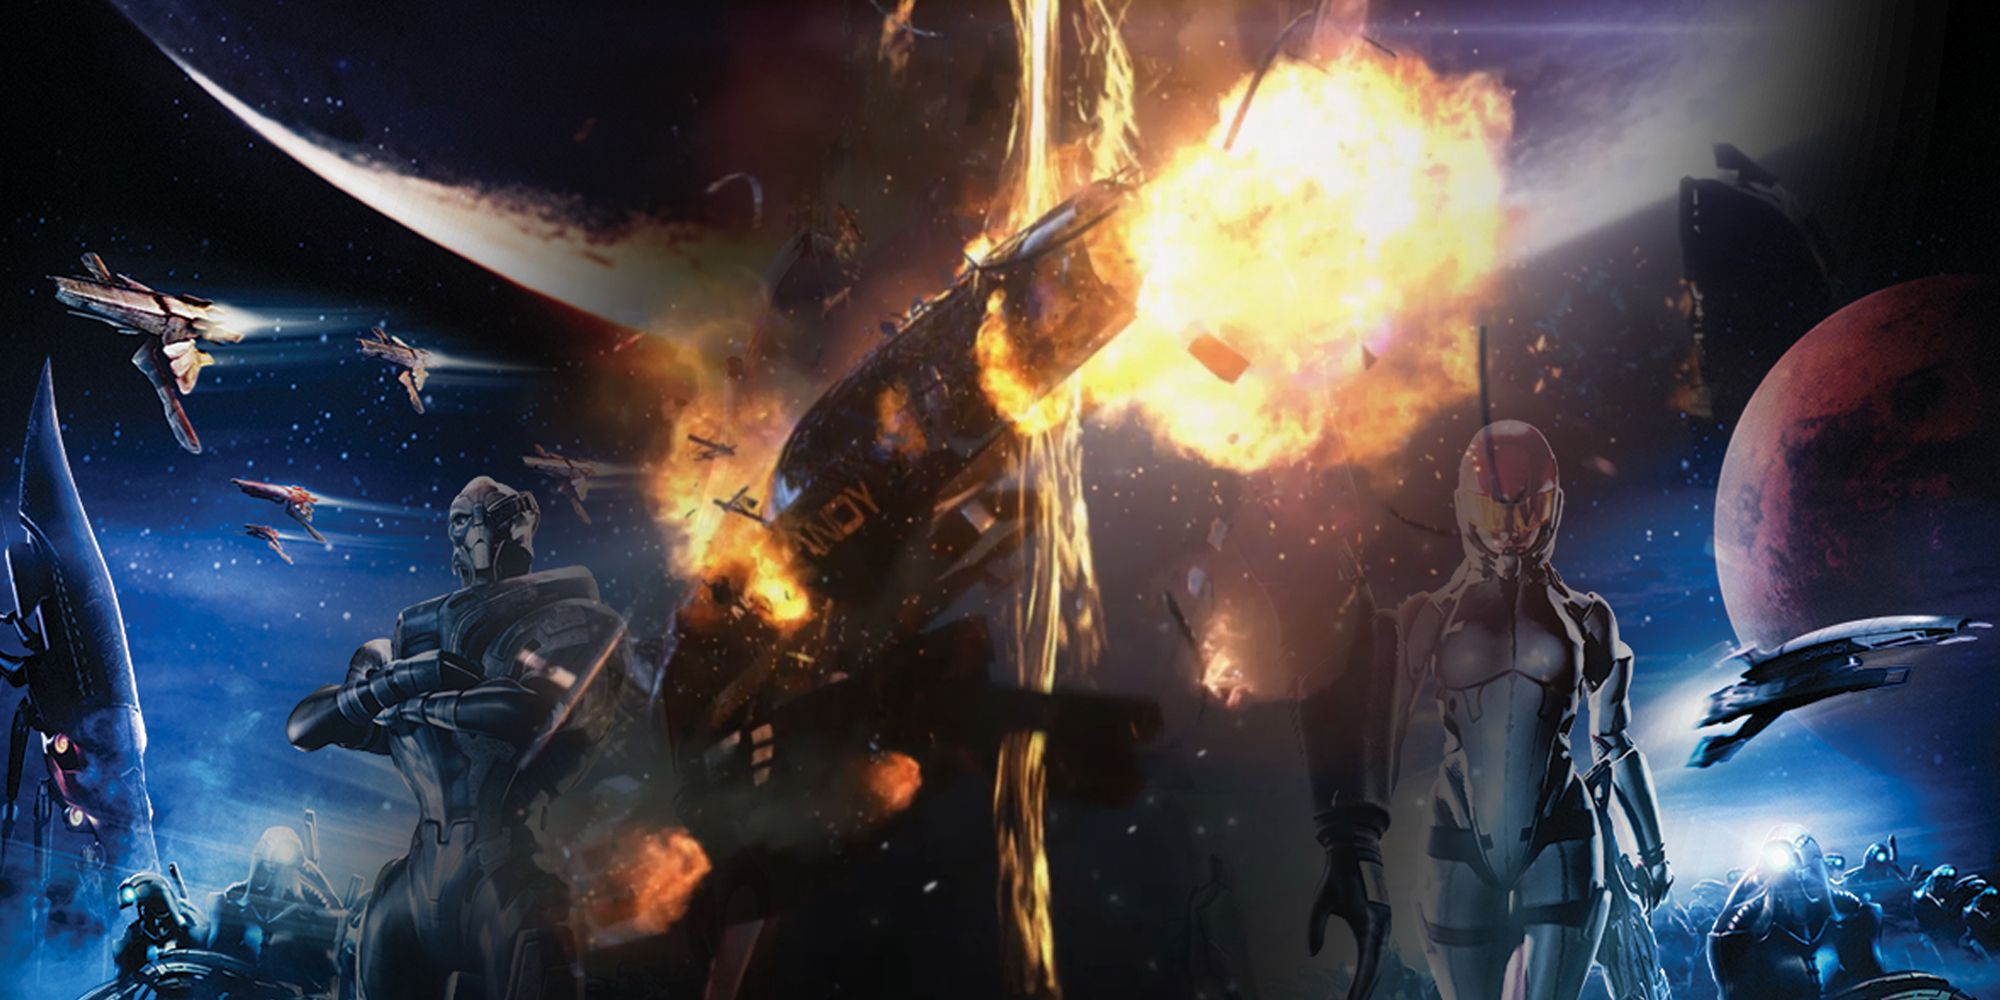 Normandy exploding through Mass Effect 1 cover